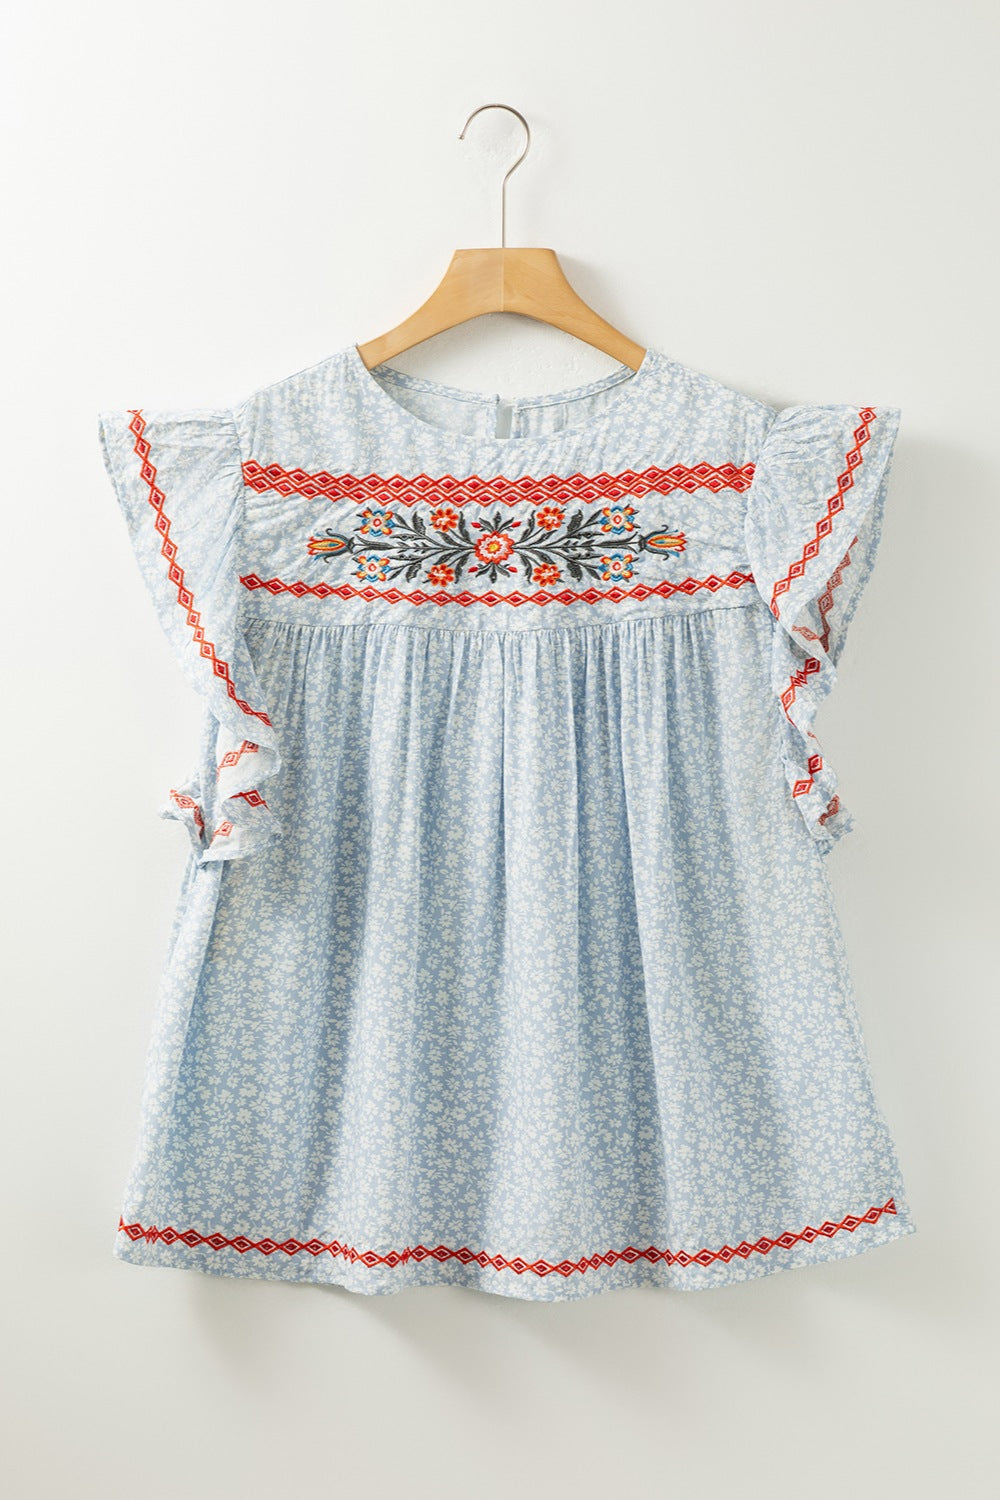 Embroidered Boho Summer Top